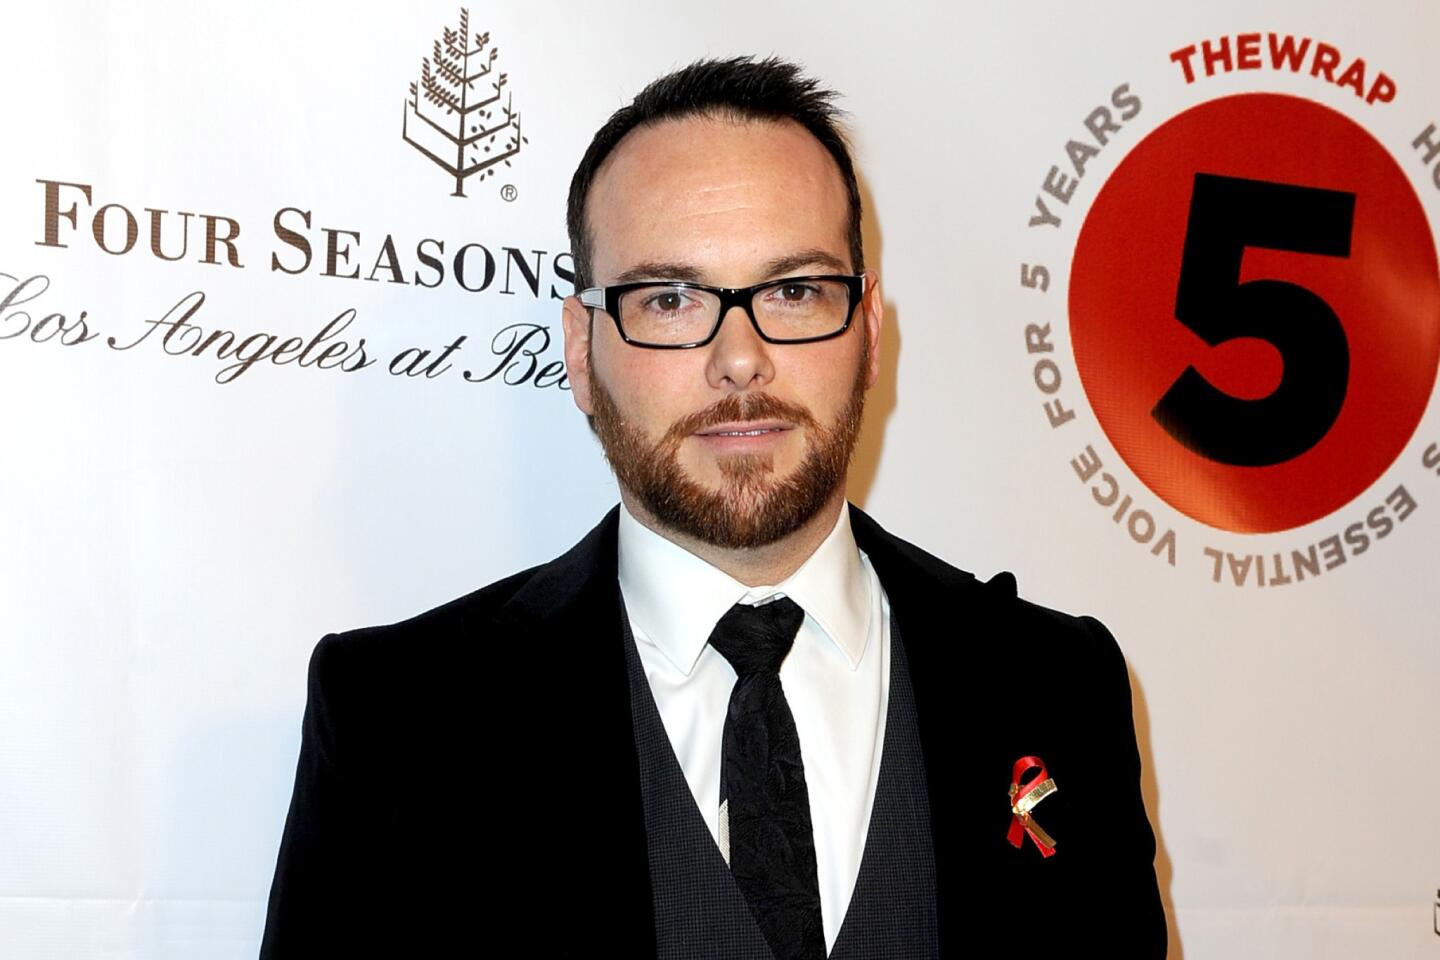 Producer Dana Brunetti was nominated for an Oscar for "The Social Network" and executive-produced Netflix's "House of Cards" and the 2010 film "Casino Jack," both with Kevin Spacey.